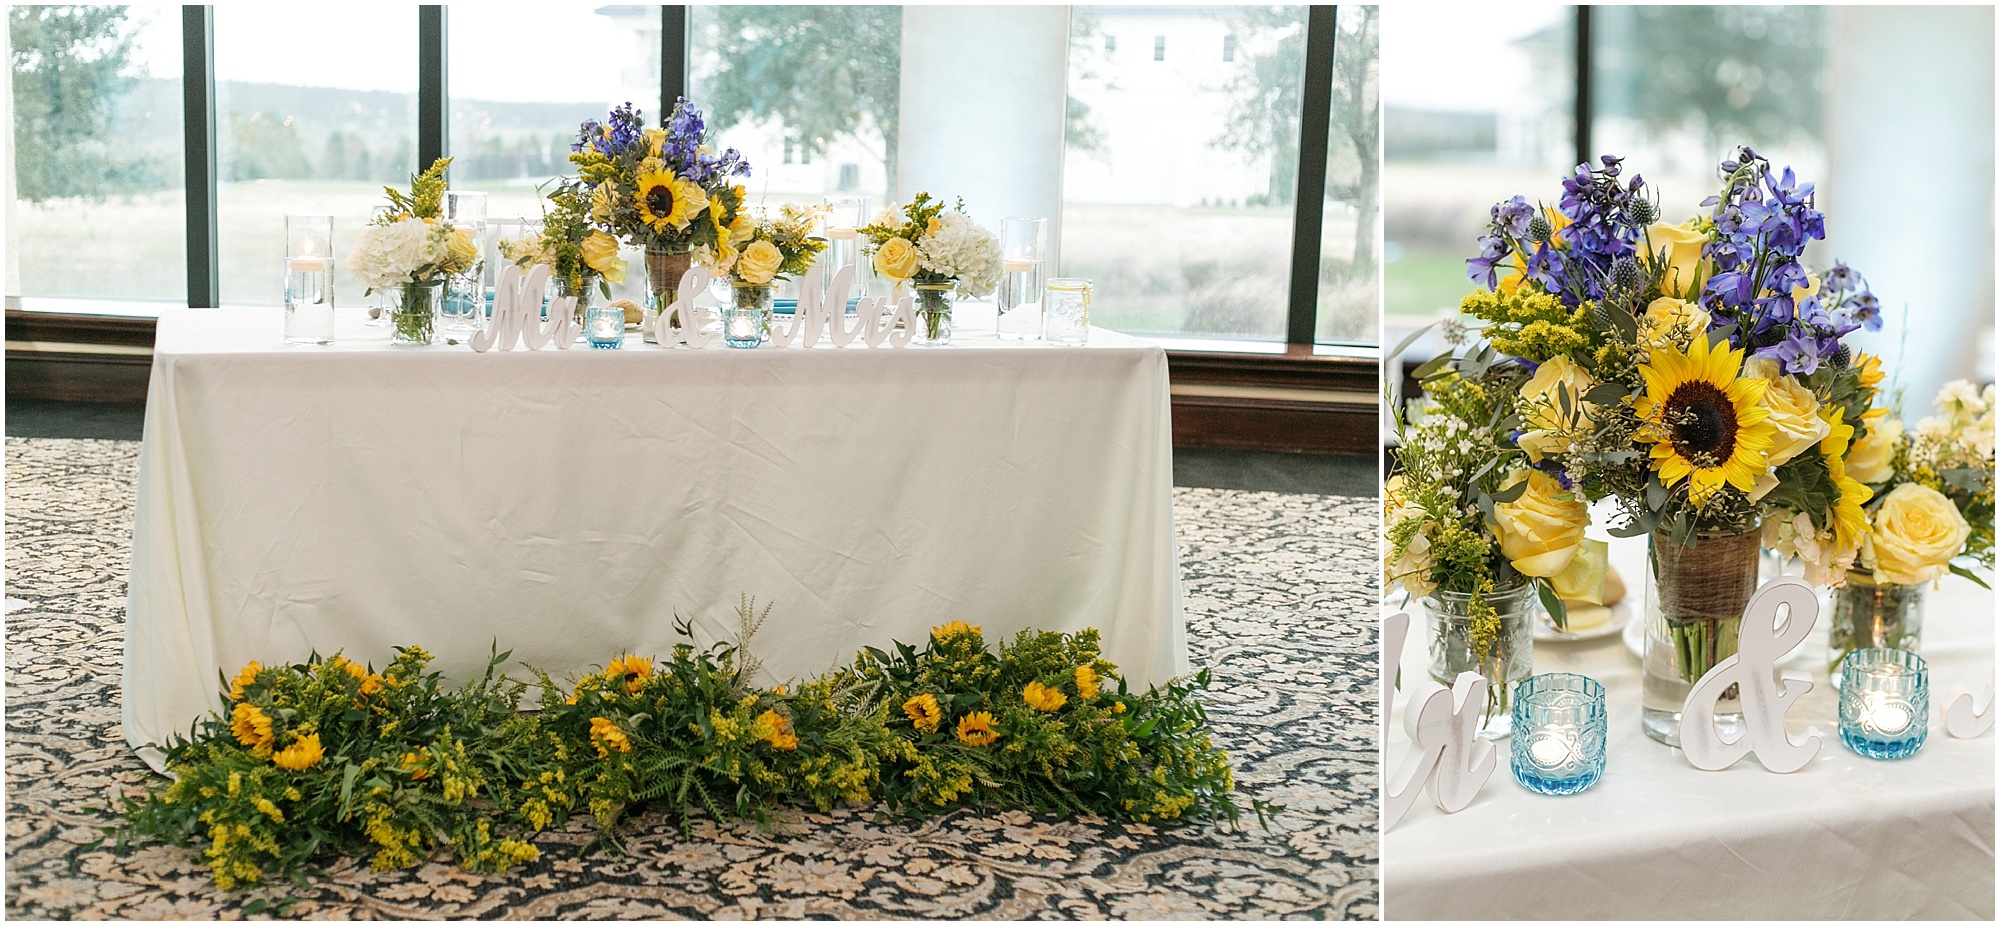 Sweetheart table decorated with sunflowers and bride's bouquet.